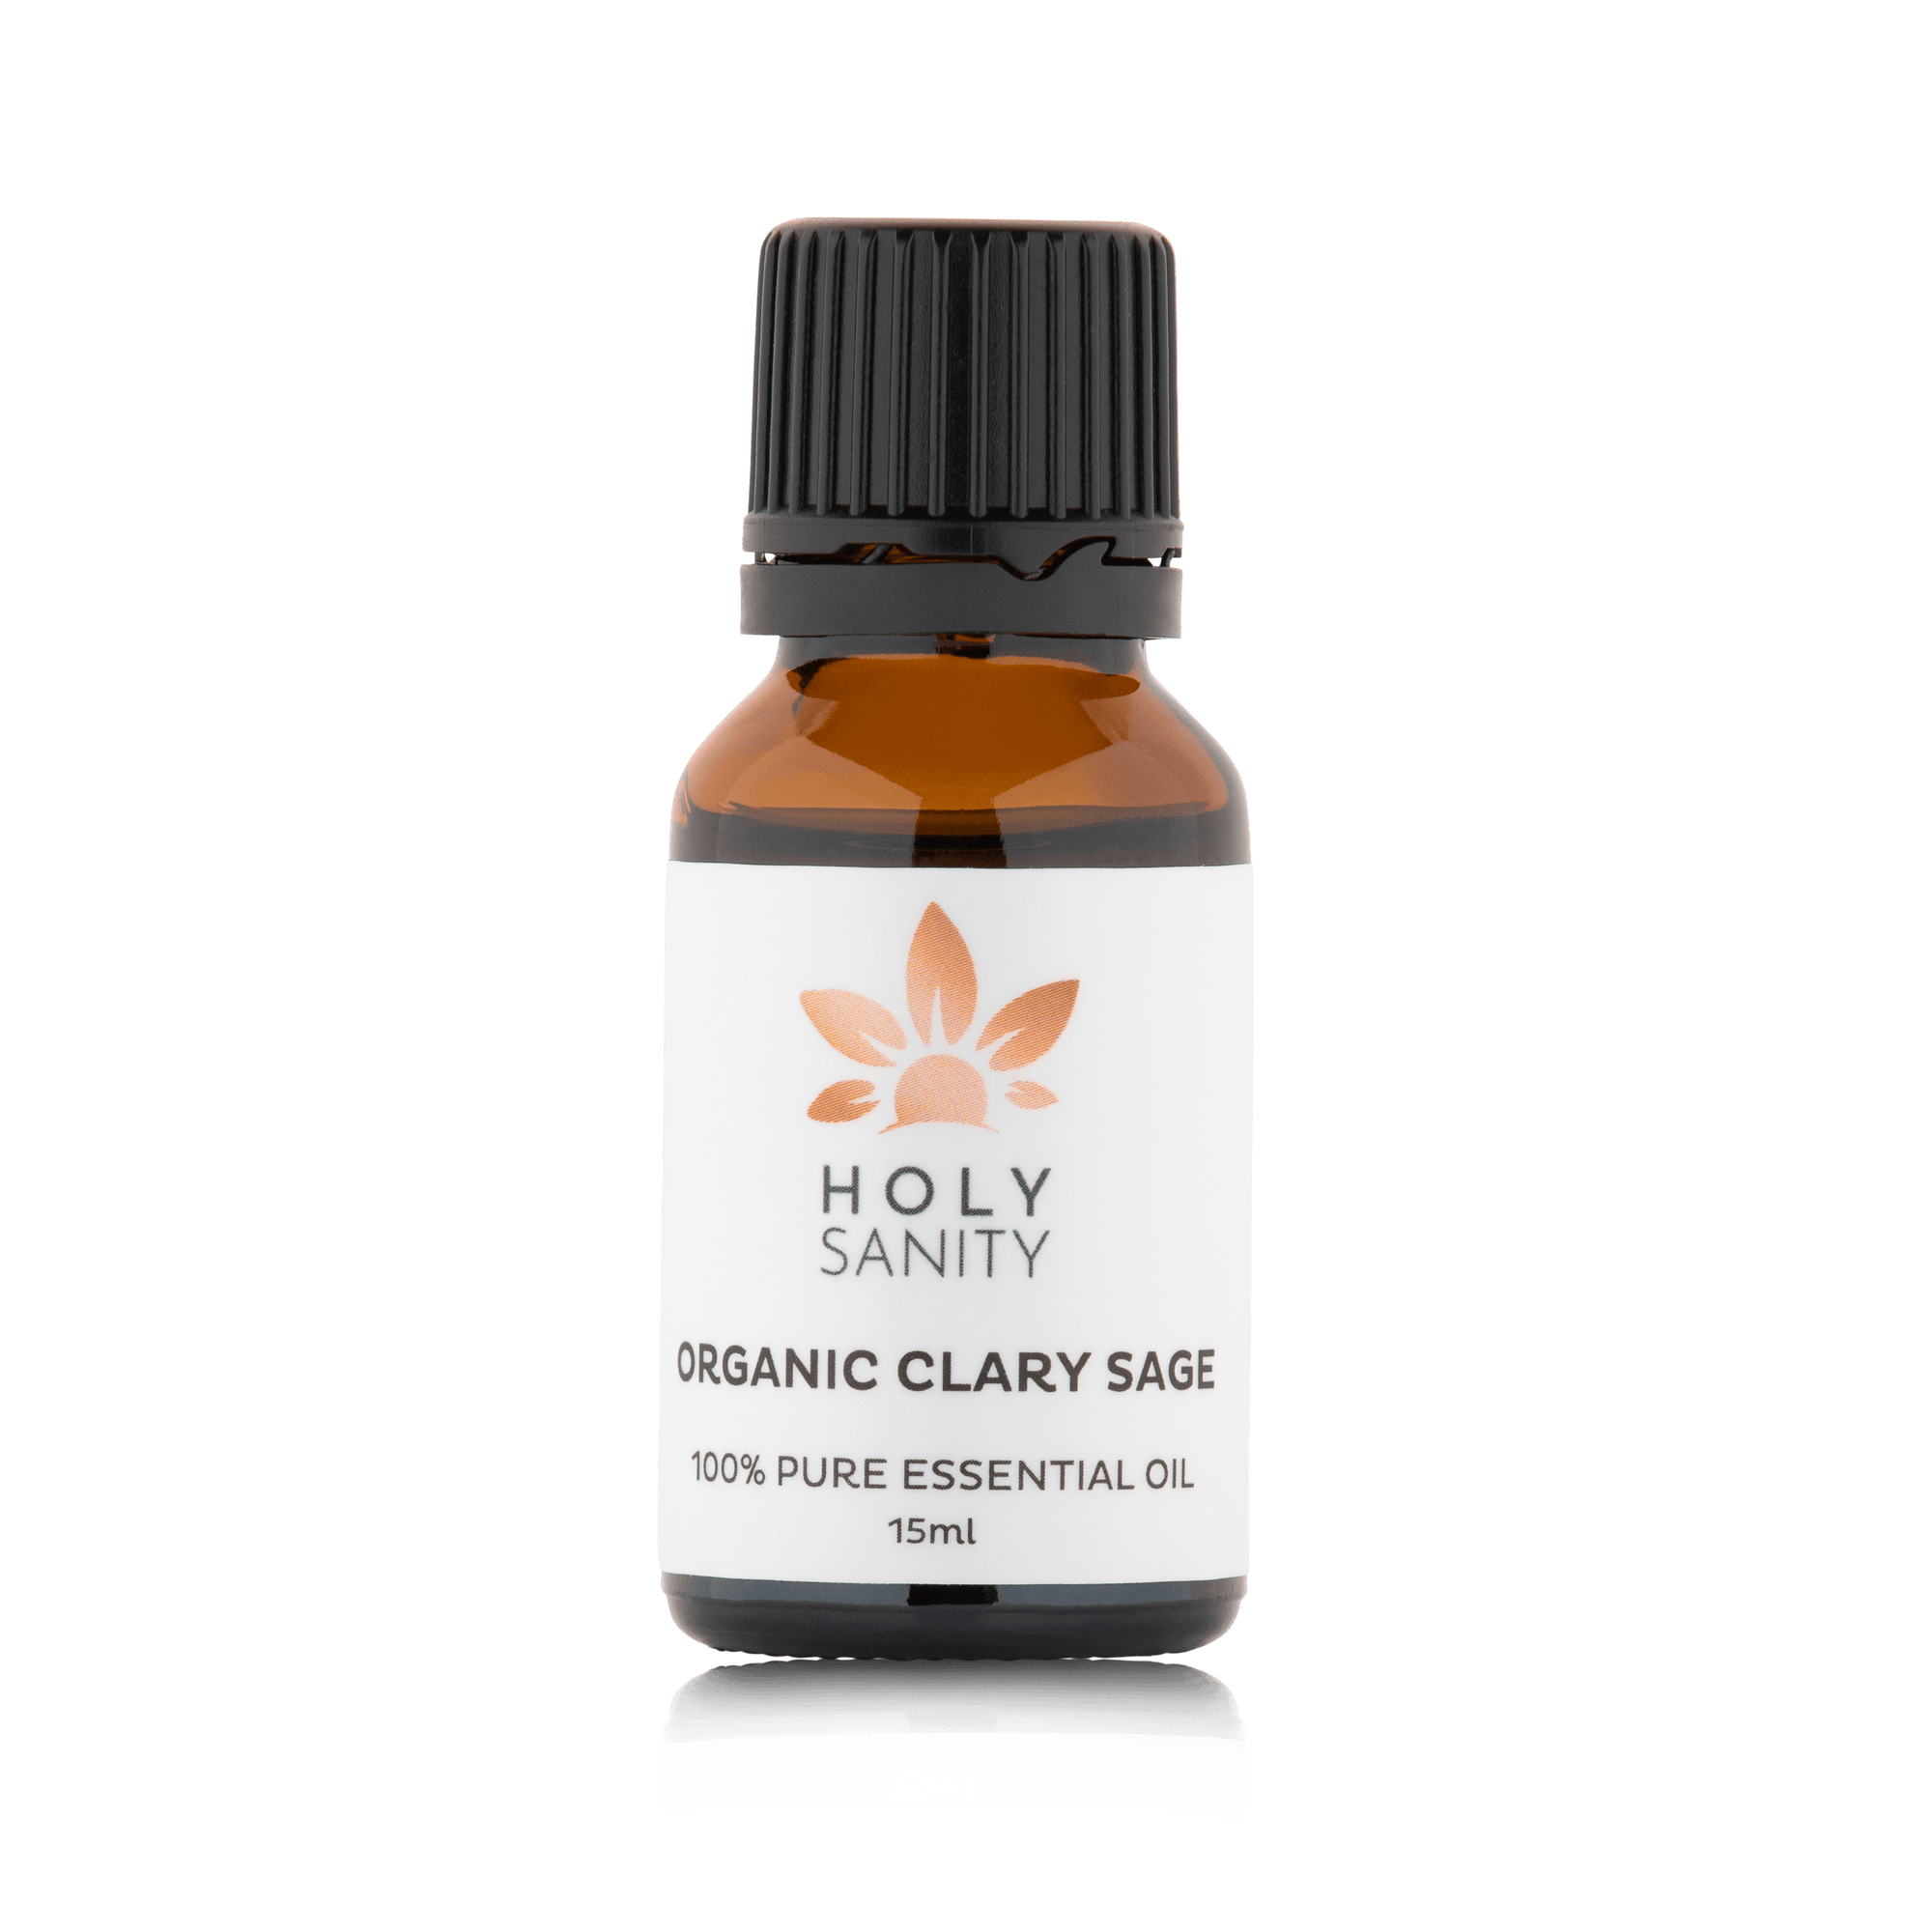 Organic Clary Sage Essential Oil (15ml) - Holy Sanity 